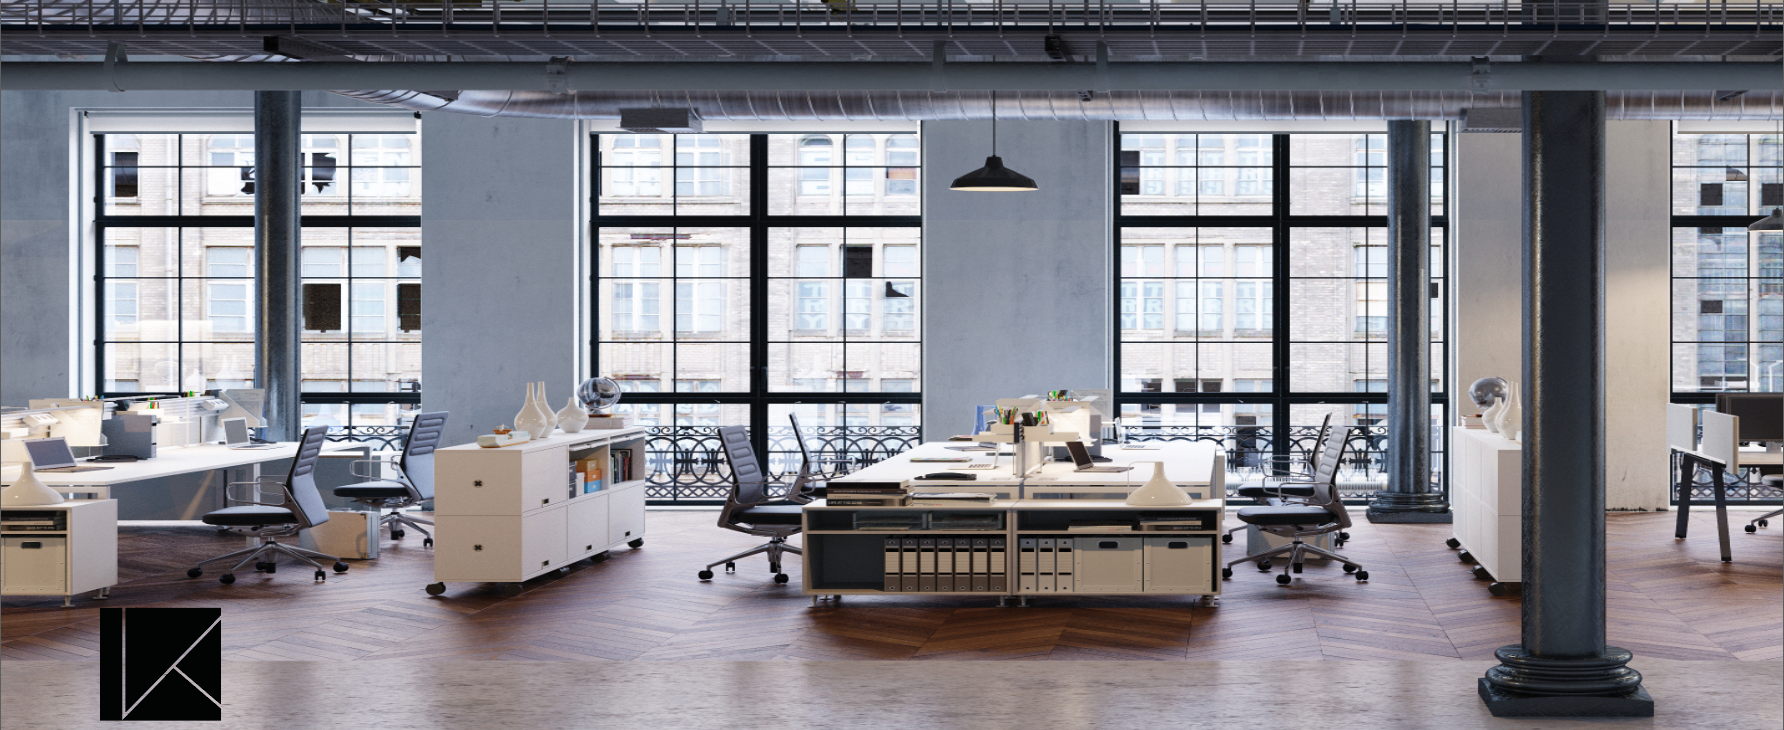 What's New in Loft Office Design? 3 Emerging Trends